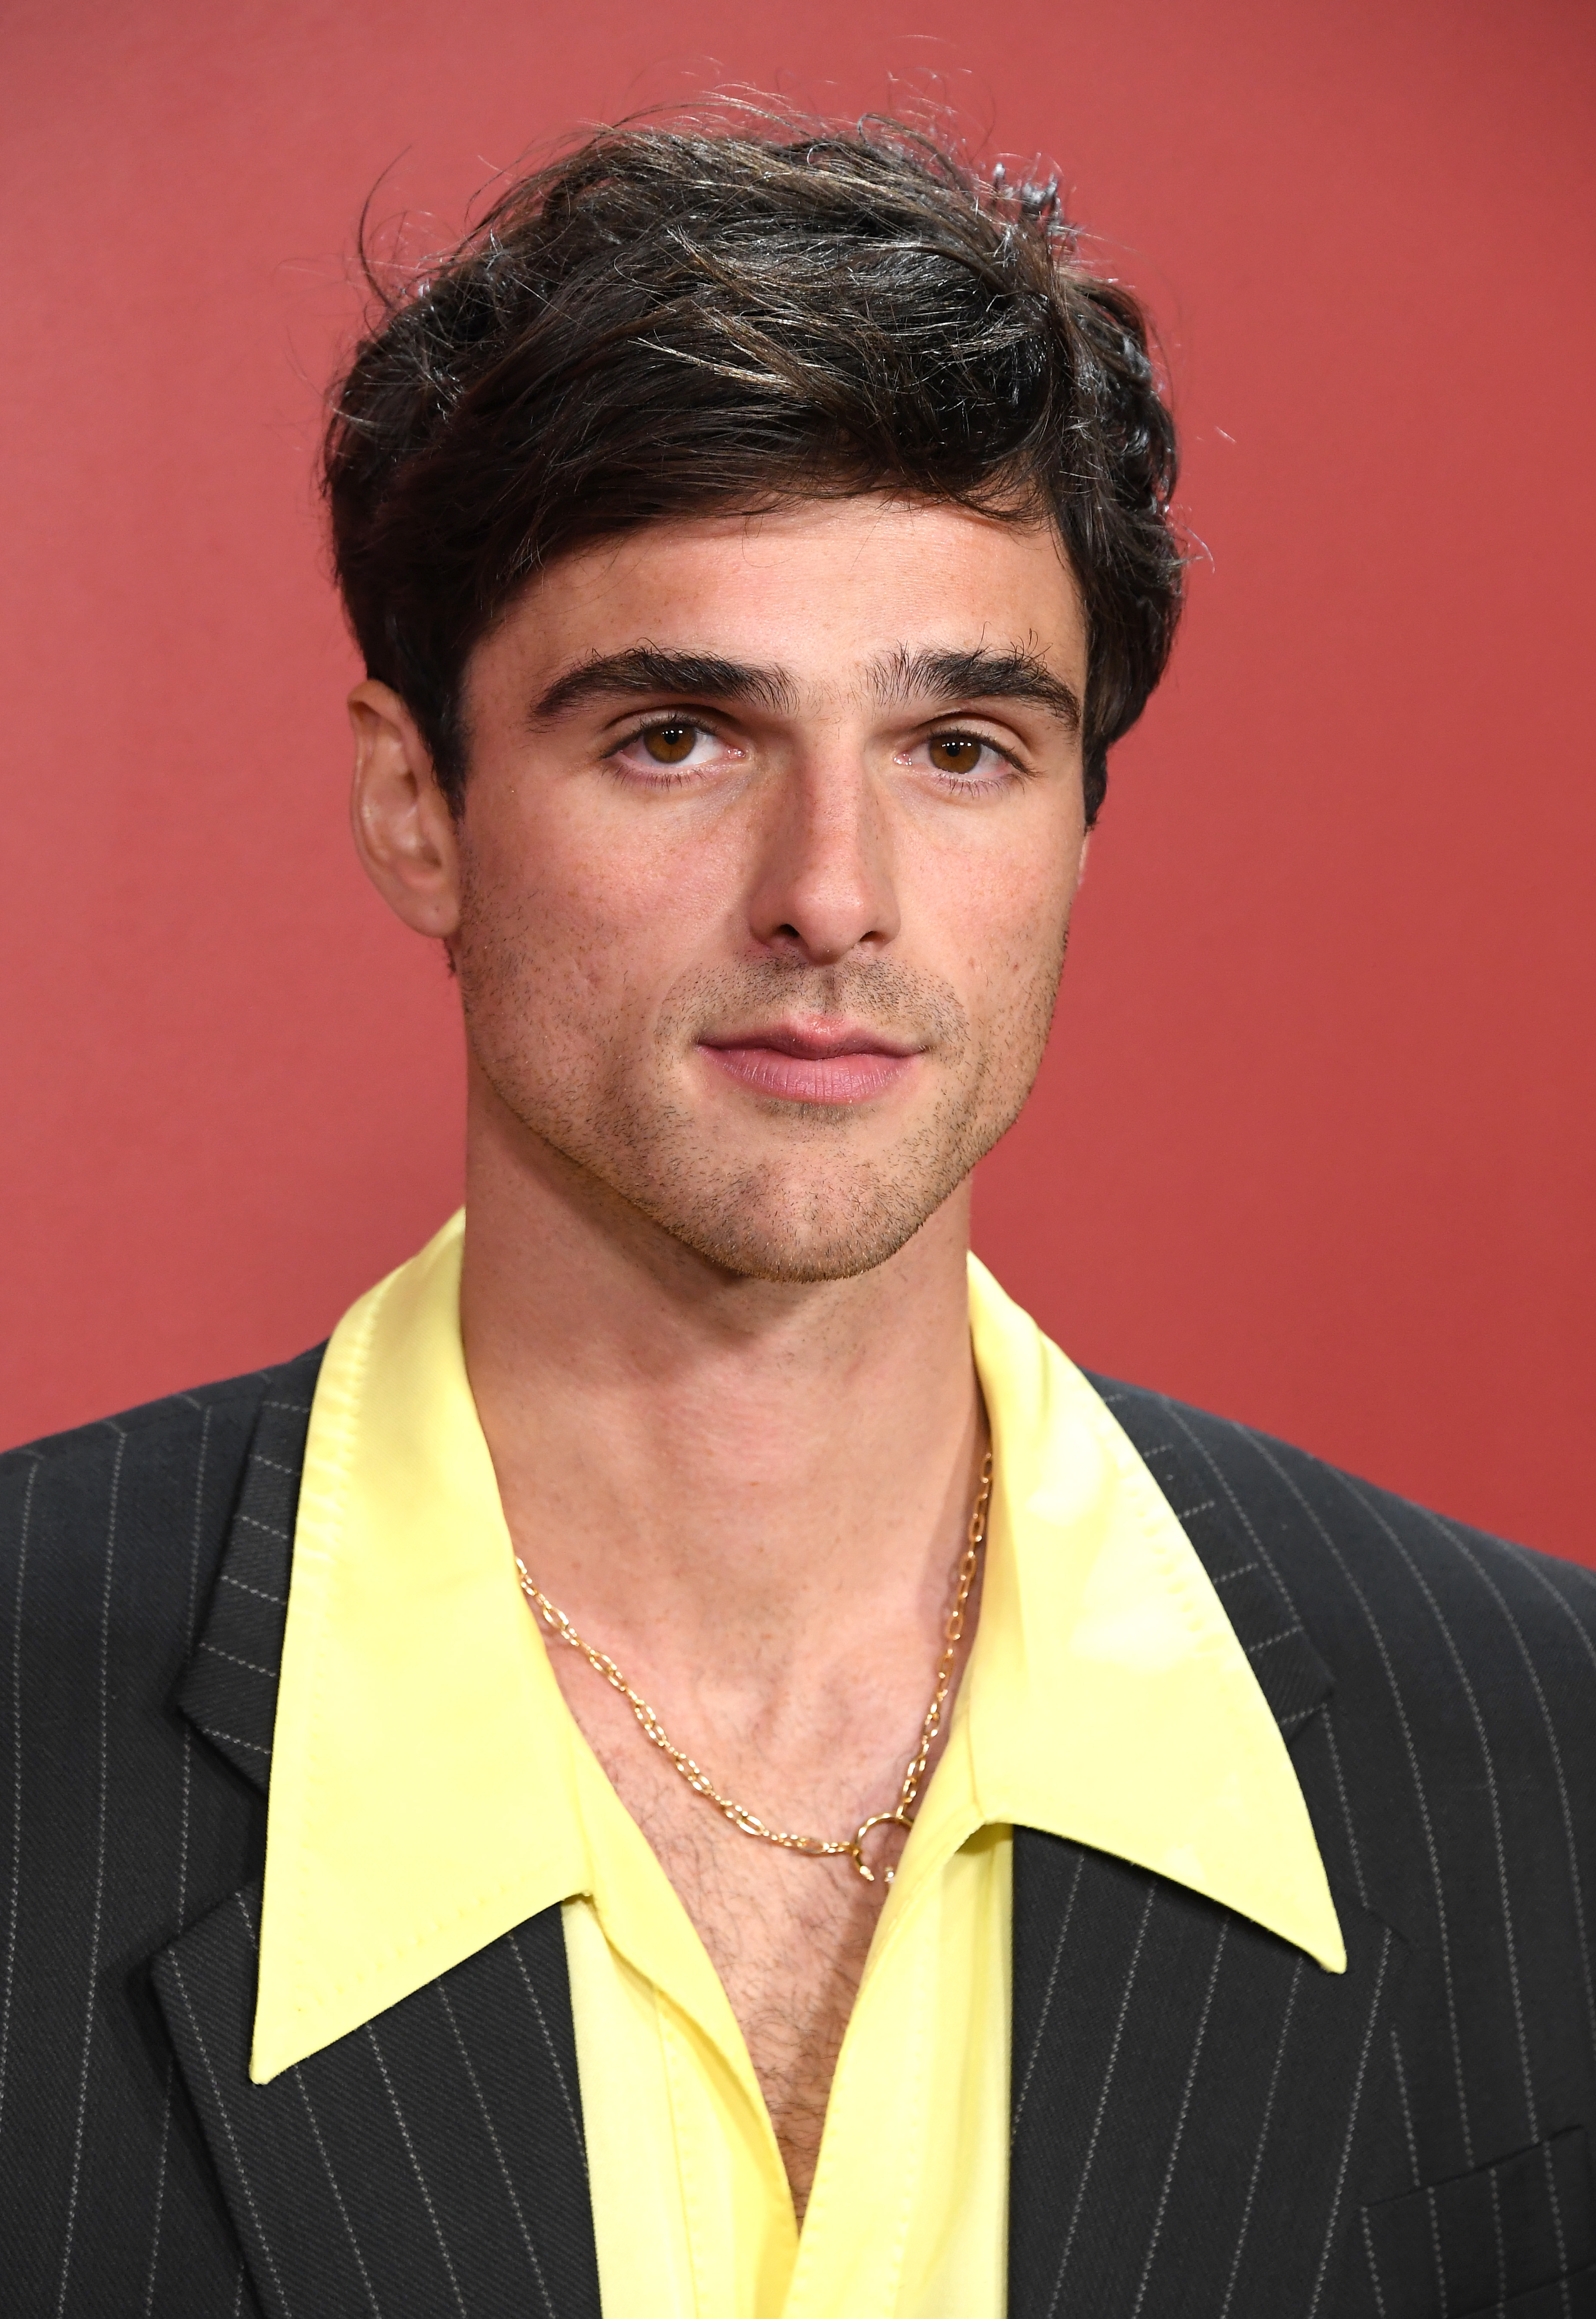 A close-up of Jacob in a pin-striped suit jacket and a shirt